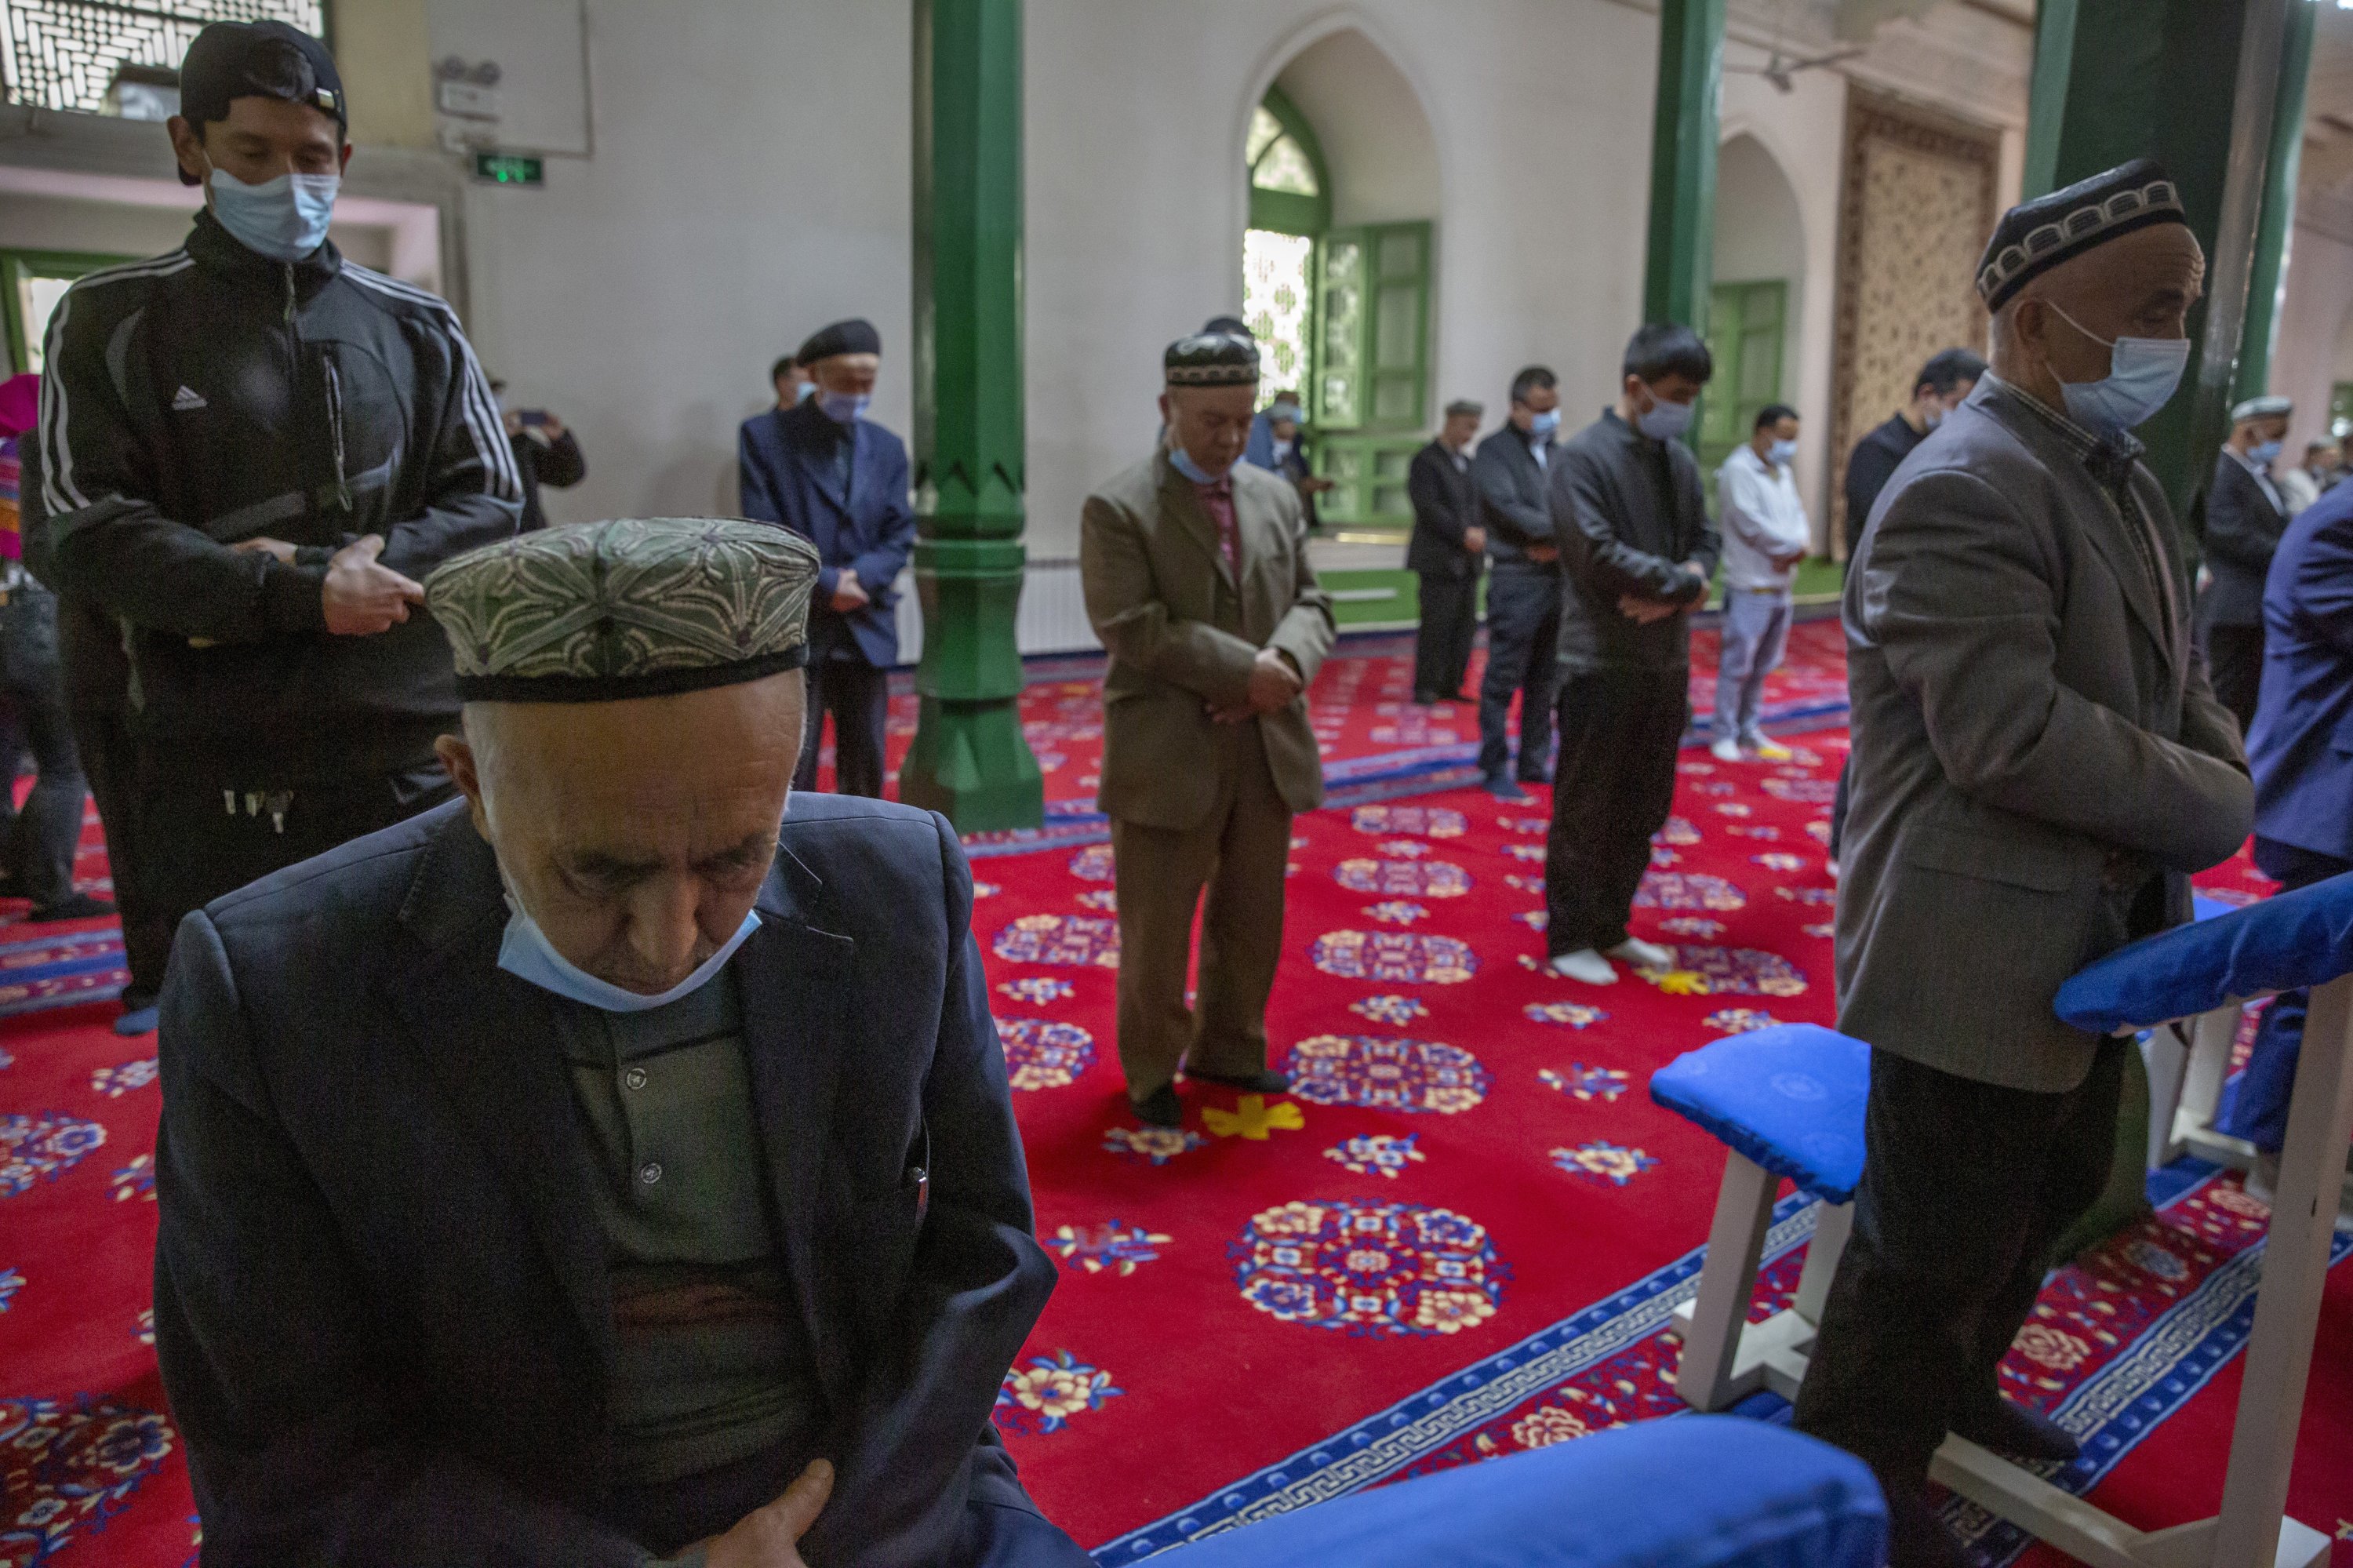 Uyghurs and other members of the faithful pray during services at the Id Kah Mosque in Kashgar, Xinjiang Uyghur Autonomous Region, China, April 19, 2021. (AP Photo)